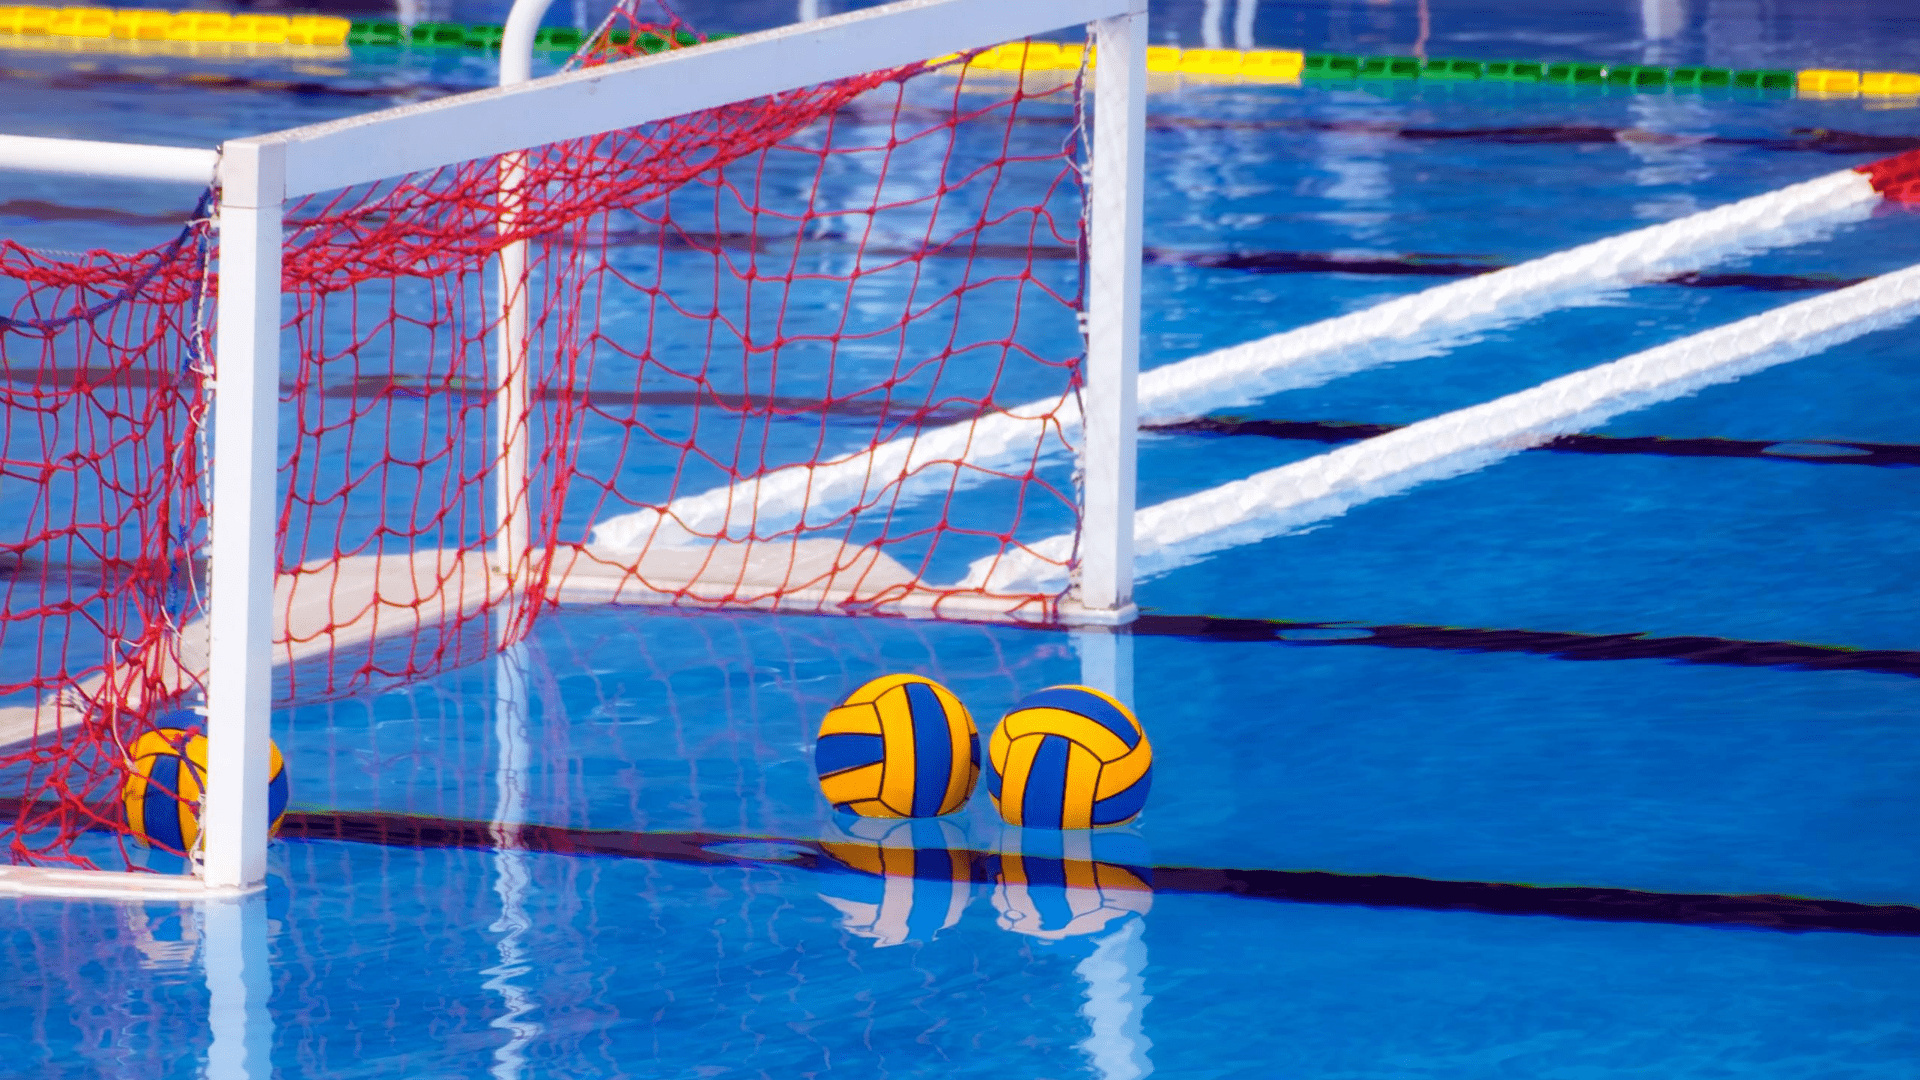 Water Polo: Swim sports balls near the goal in a competition pool, Recreational sport and a swimming activity. 1920x1080 Full HD Background.